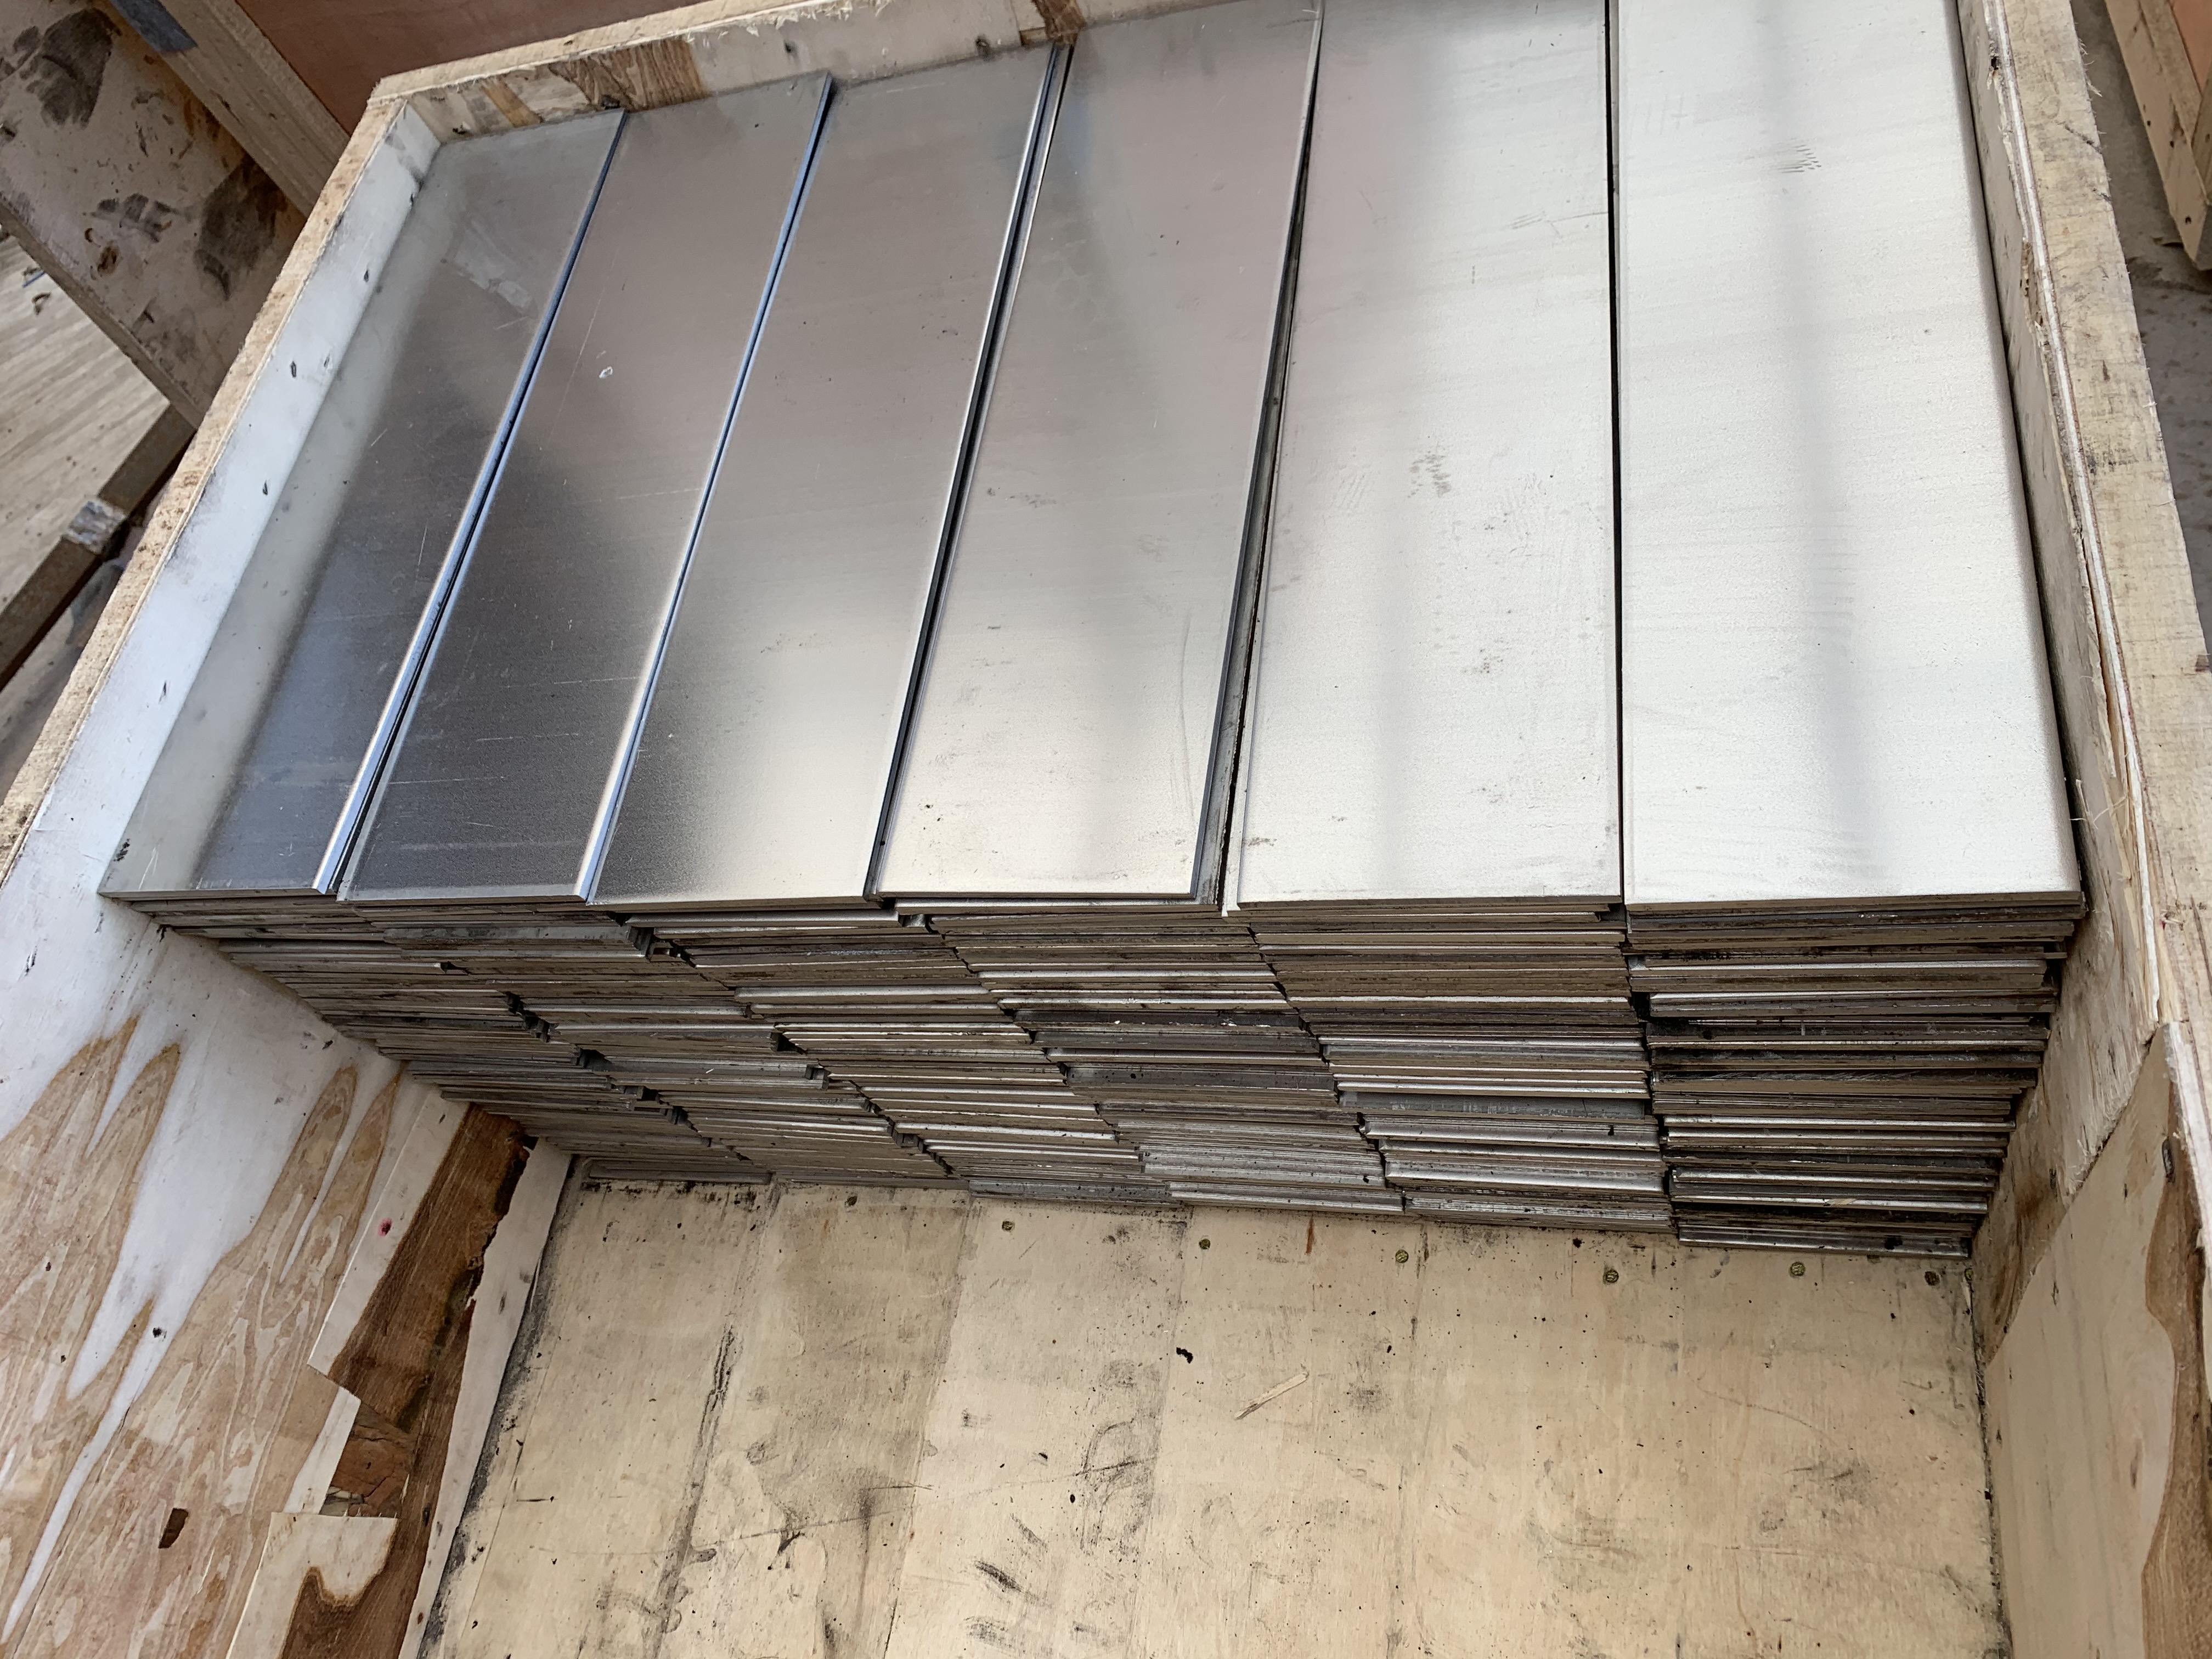 Prime Quality Steel Stainless Steel Price Per Kg Flat Bar For Sale Stainless Steel Flat Bar